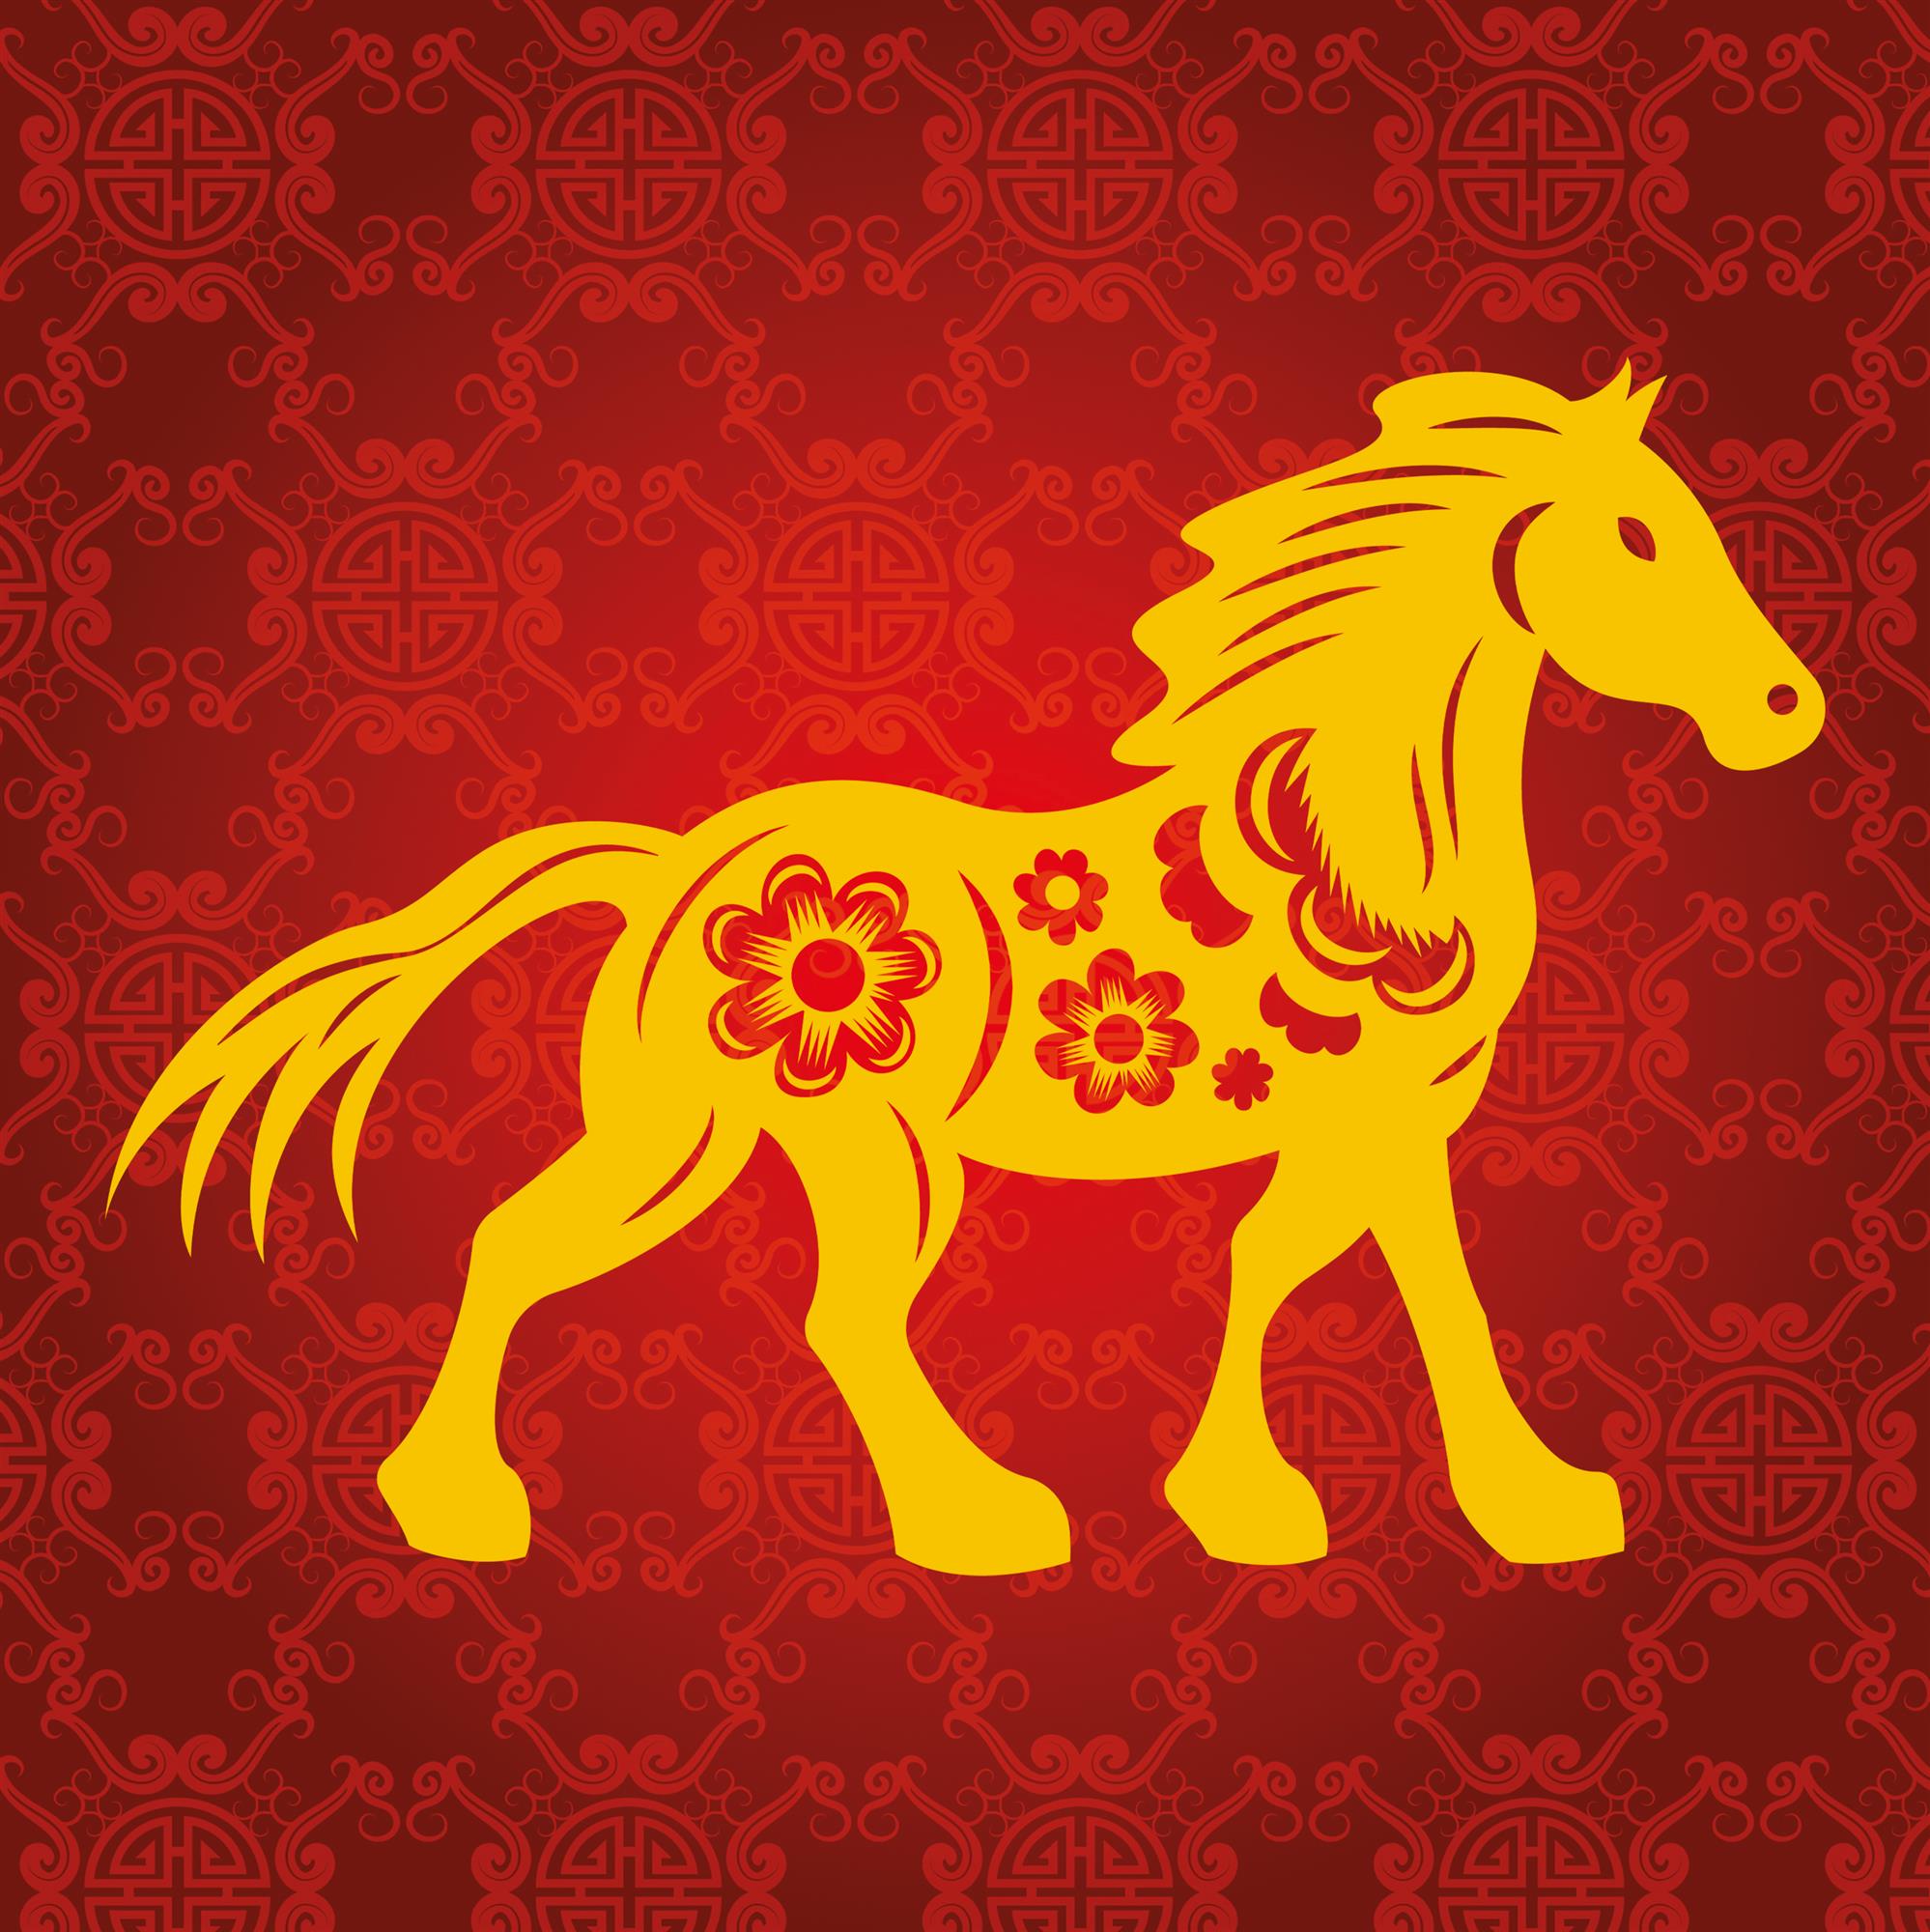 A red and yellow Chinese style illustration of a horse